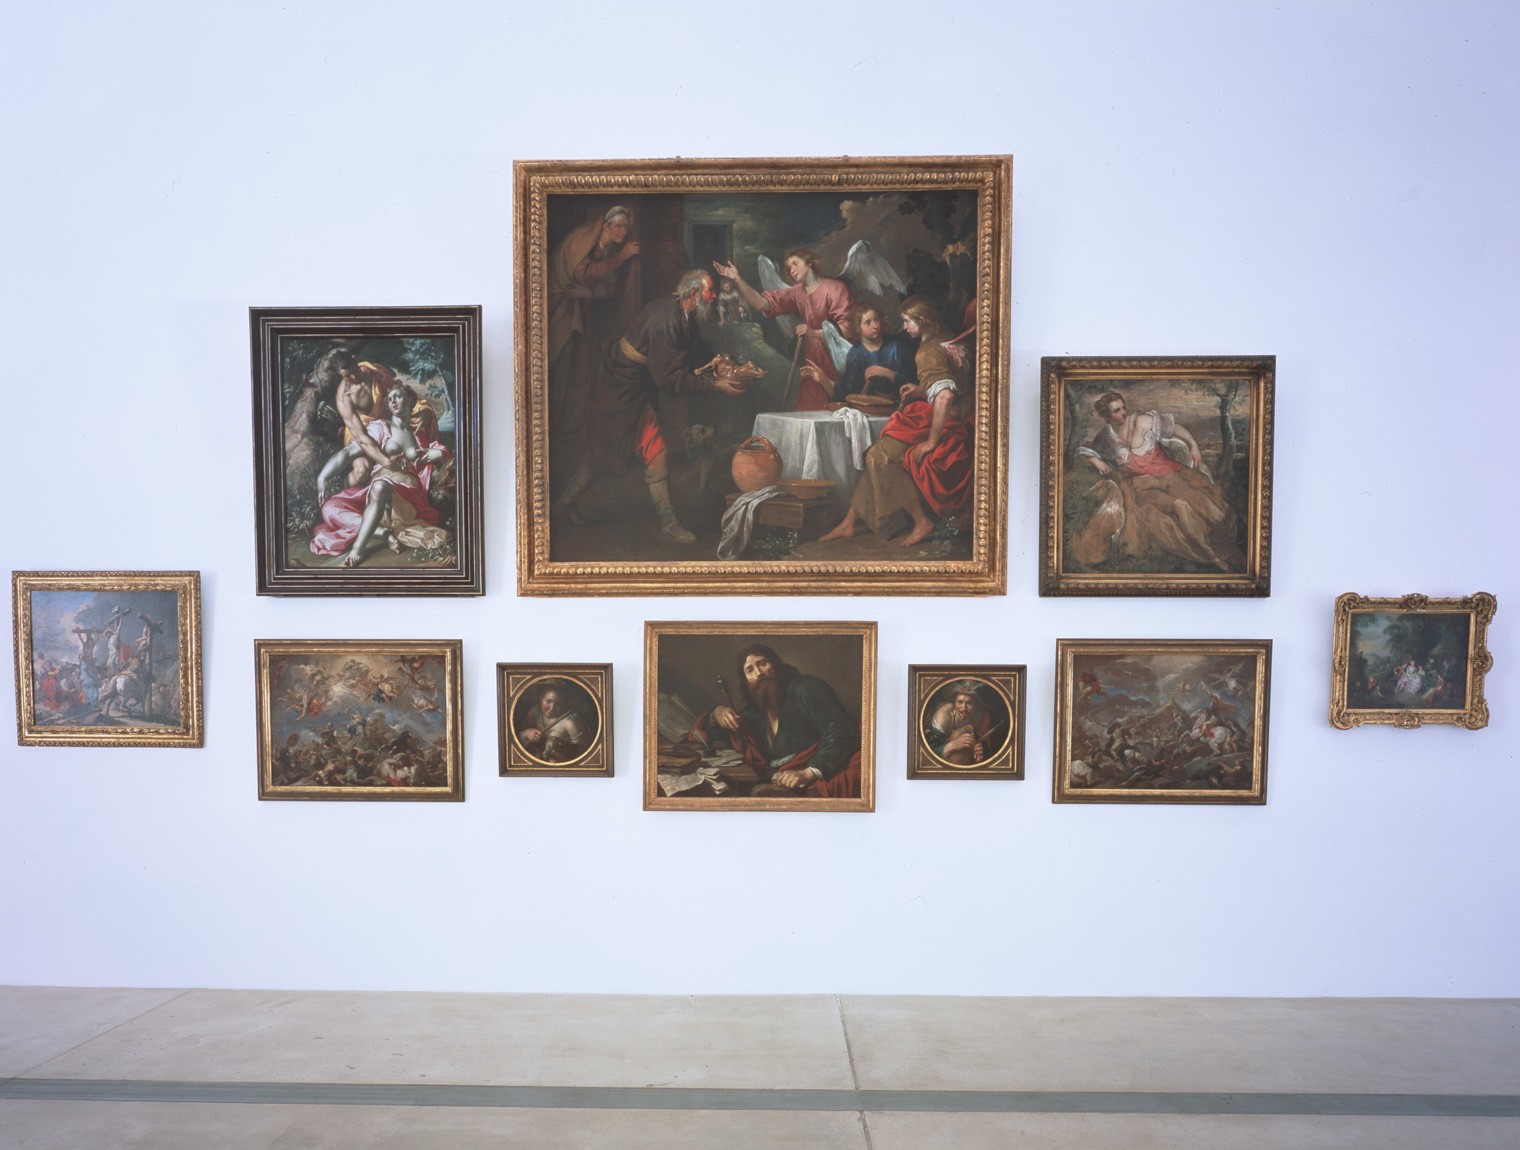 A group of paintings hung salon-style in the Main Gallery.